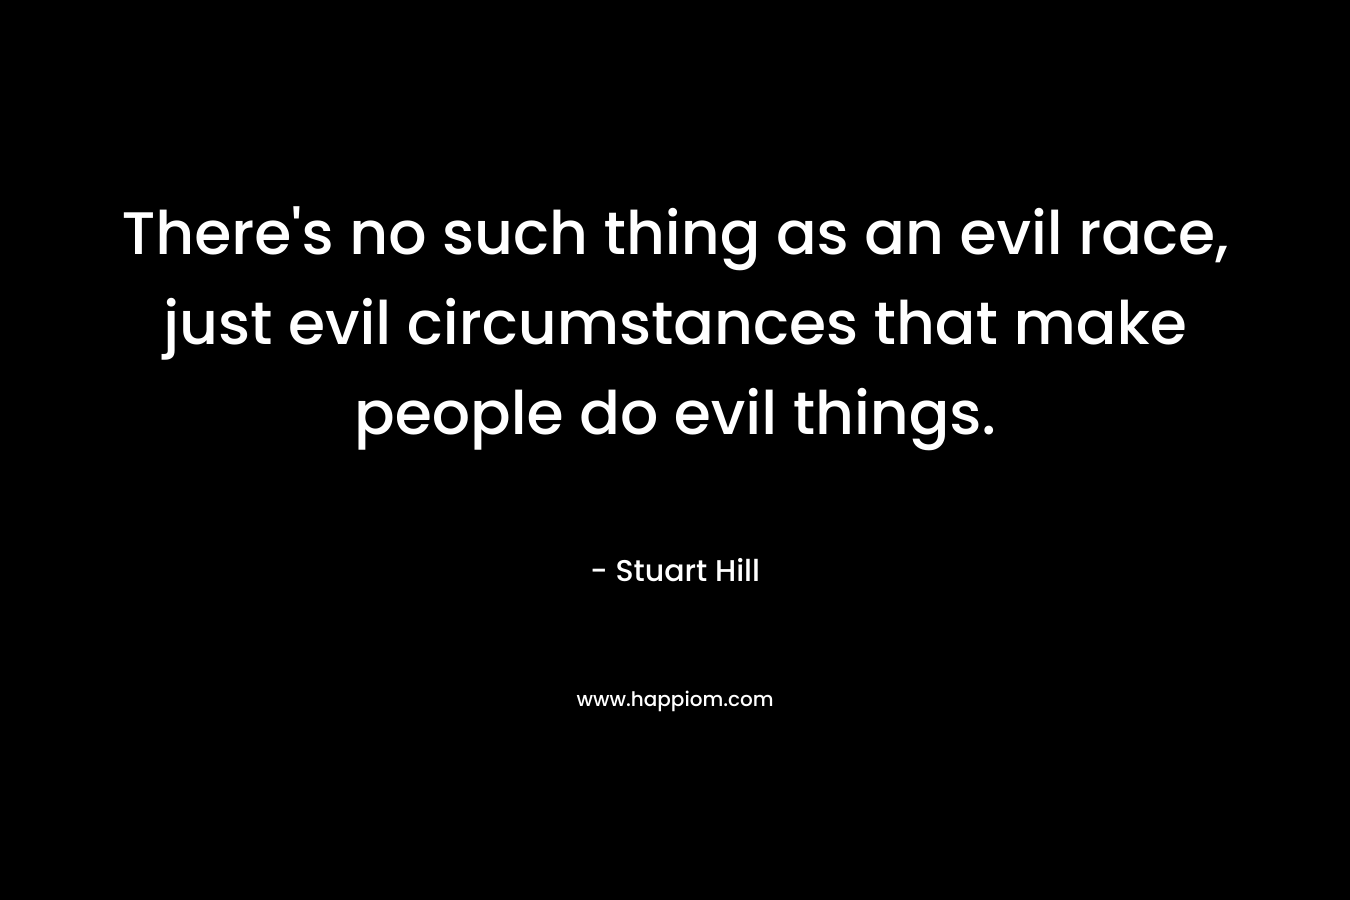 There's no such thing as an evil race, just evil circumstances that make people do evil things.